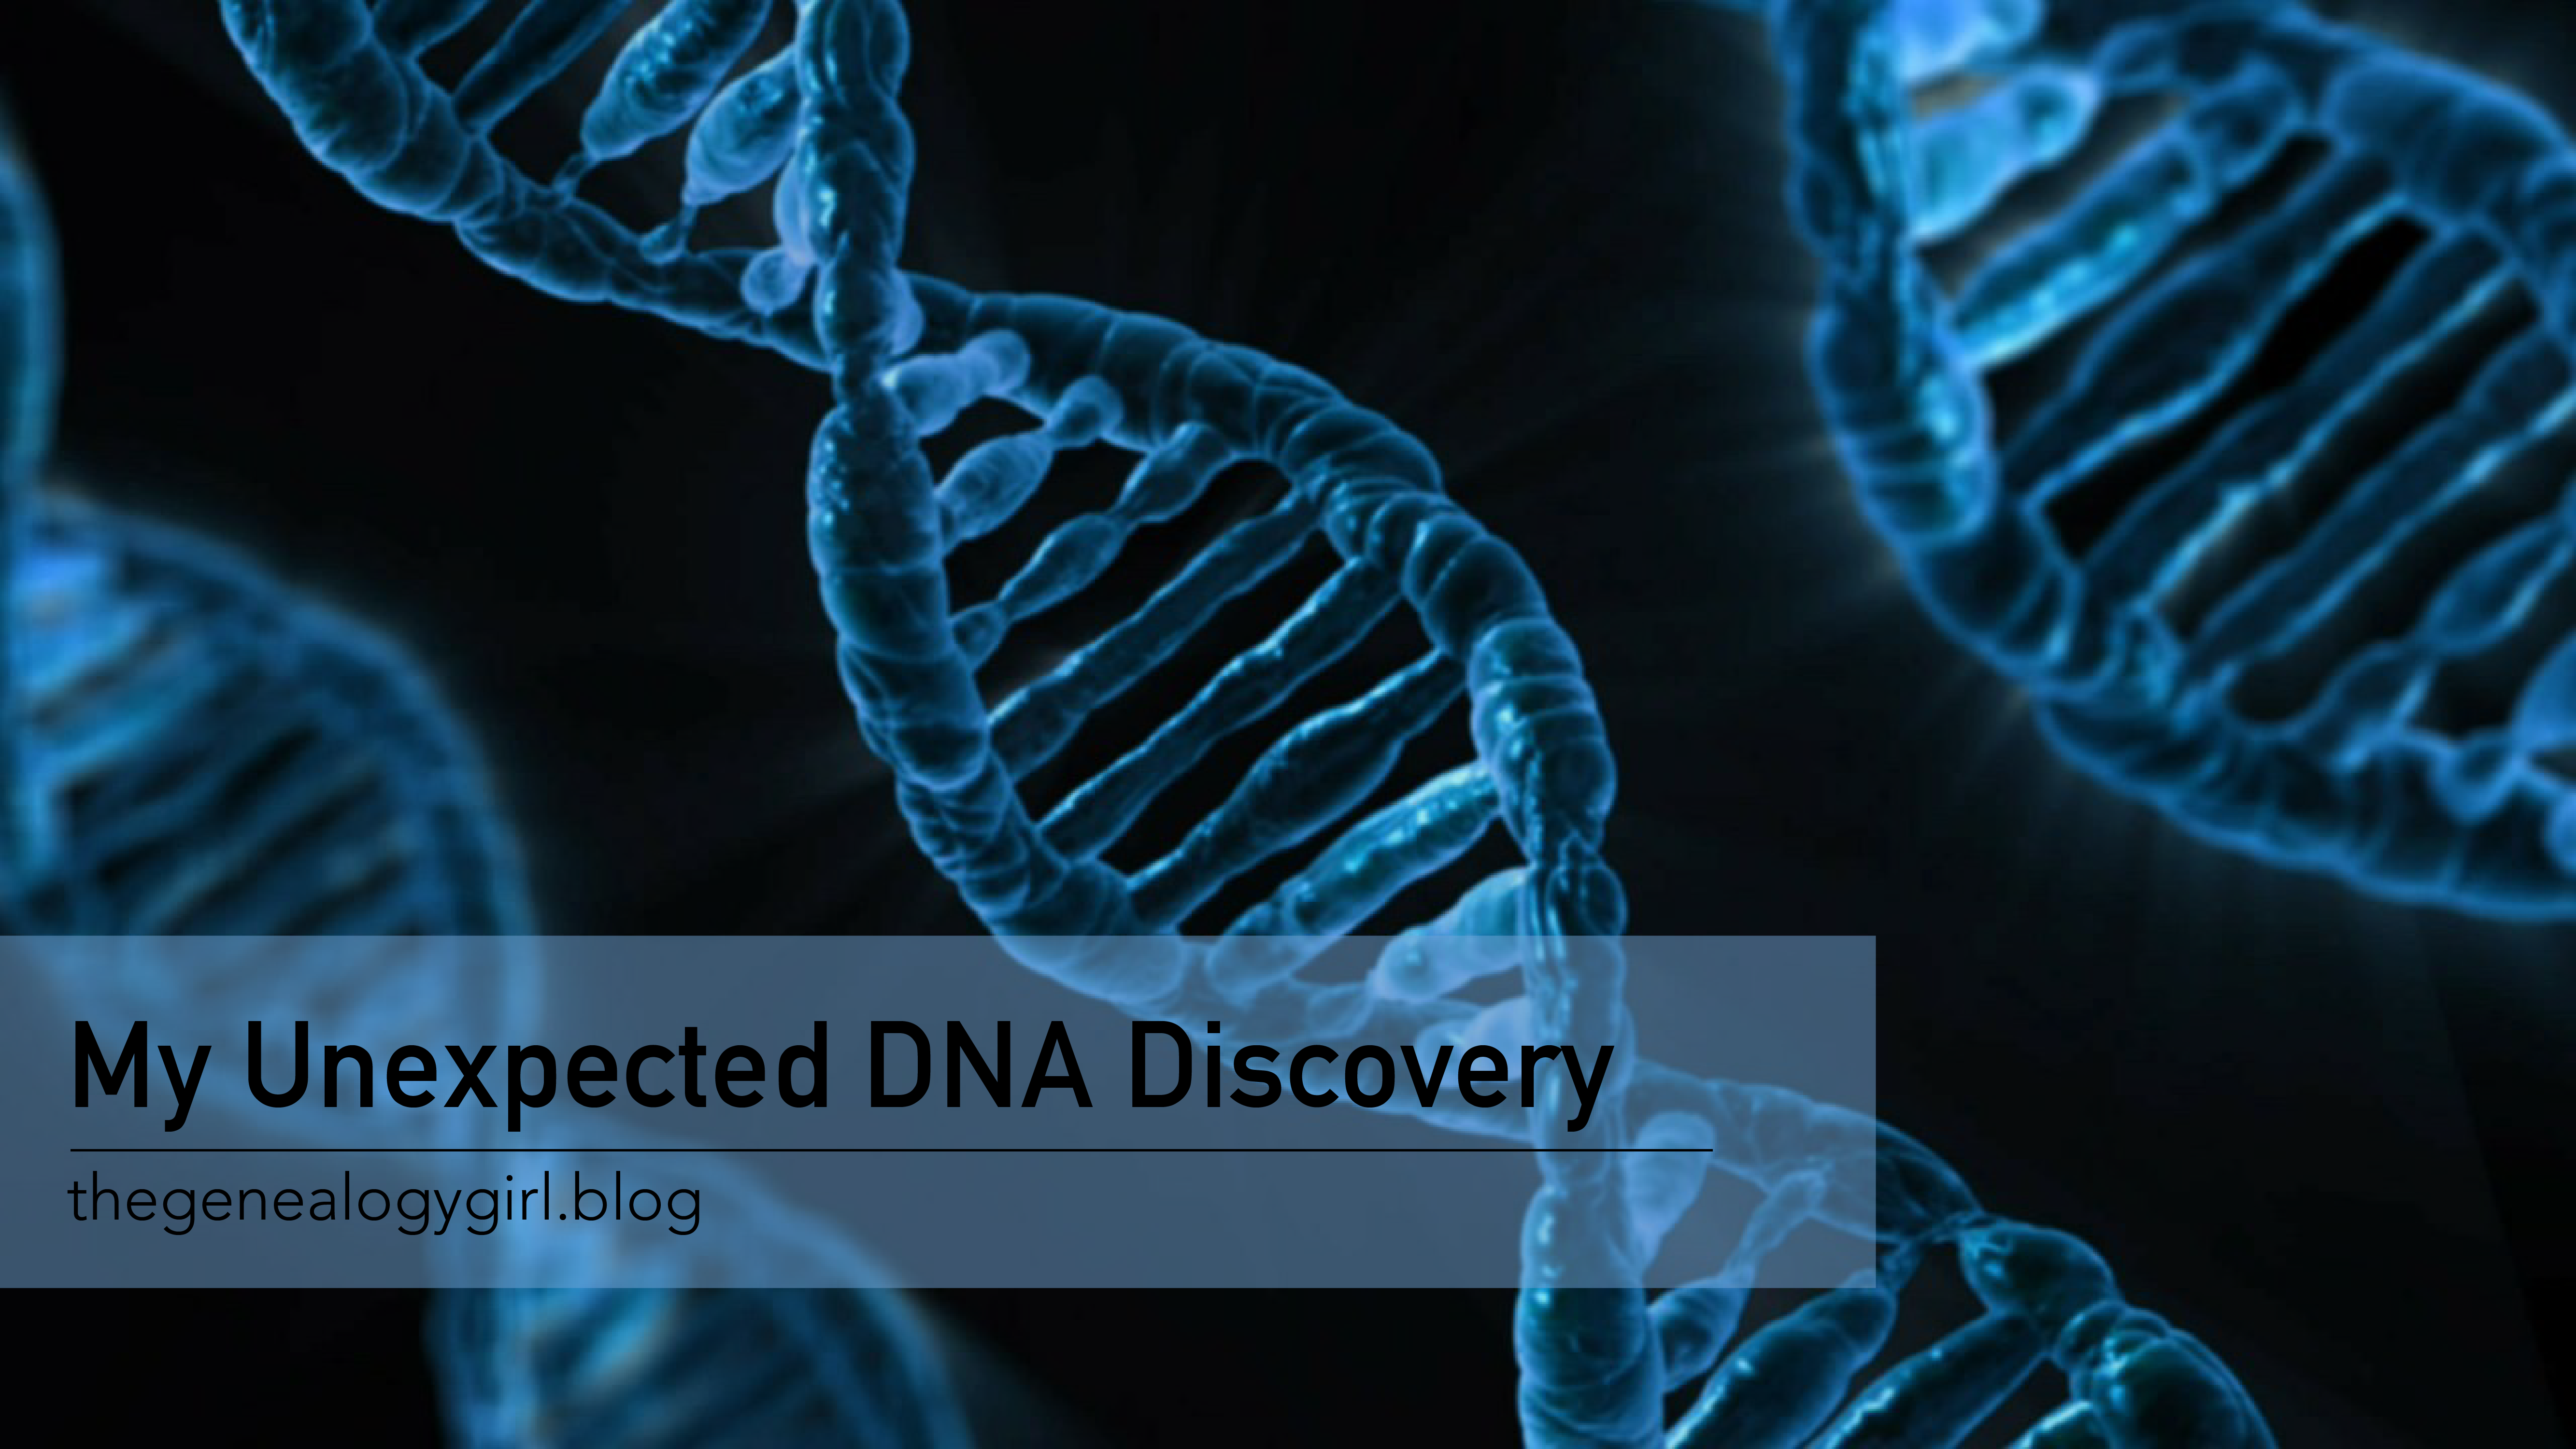 essay on the discovery of dna